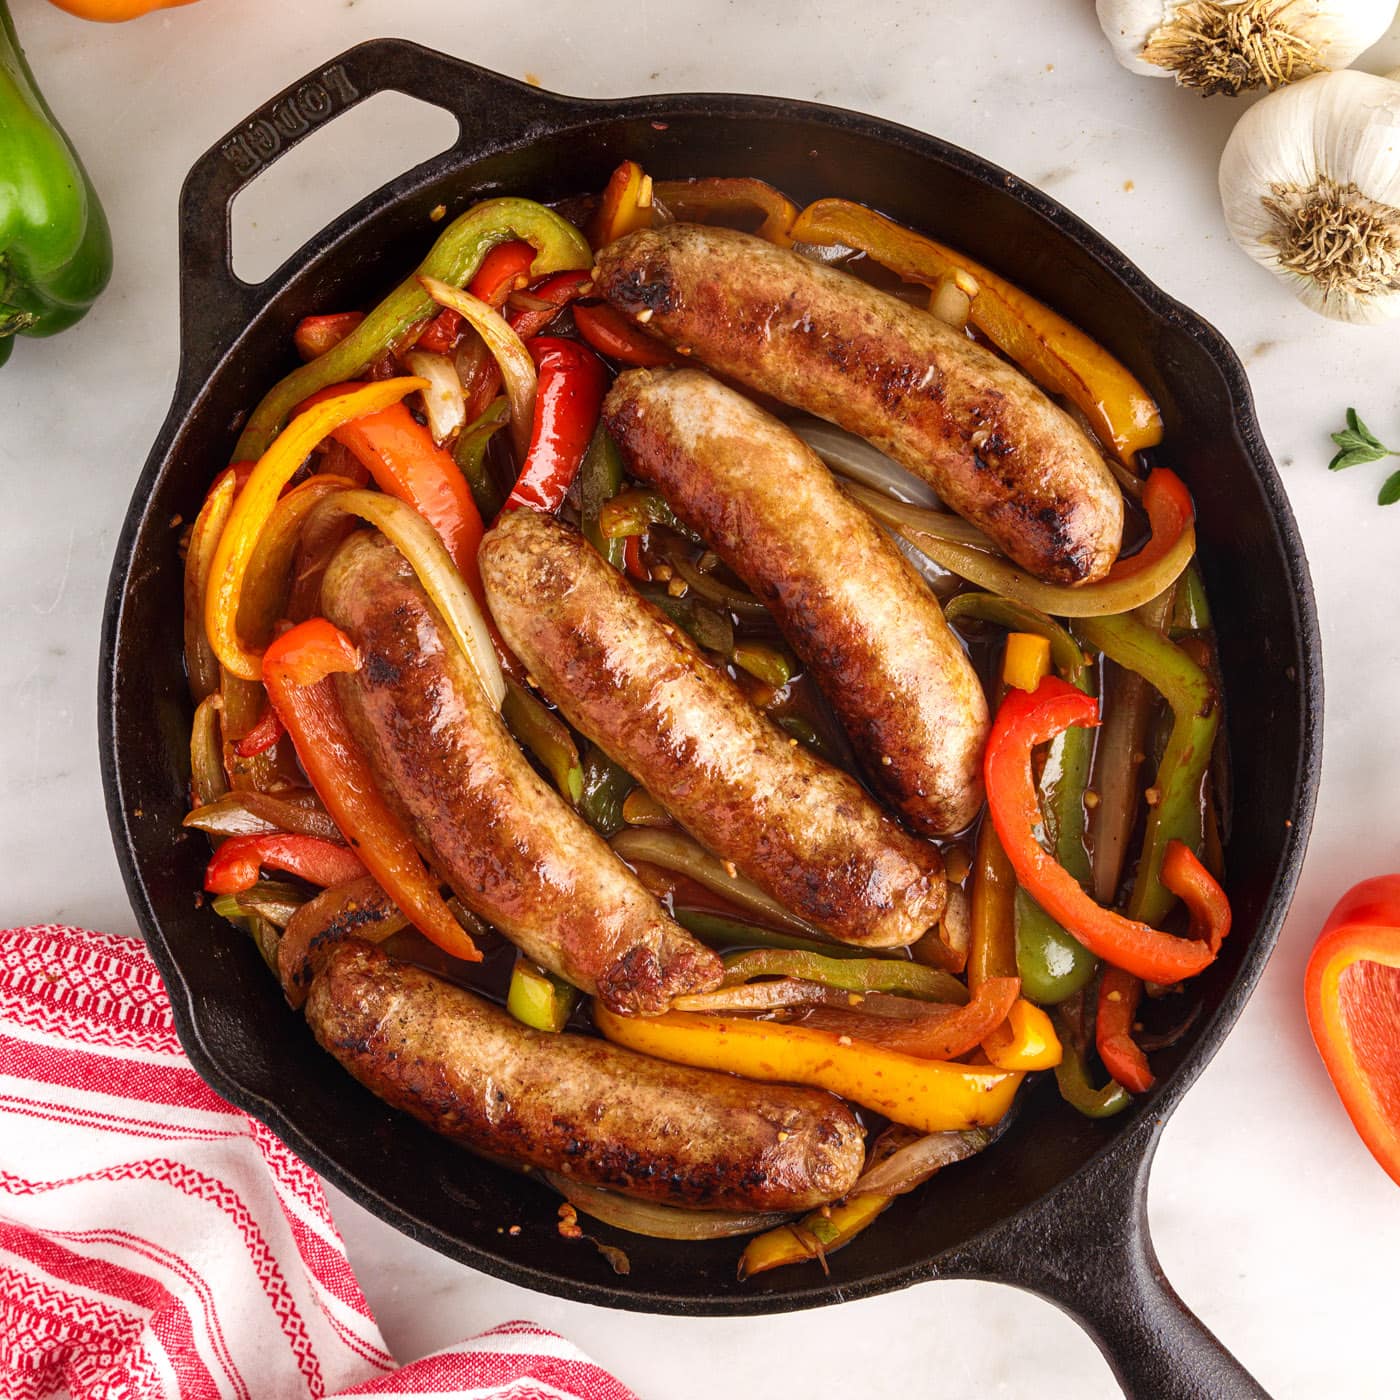 https://amandascookin.com/wp-content/uploads/2022/08/Sausage-and-Peppers-10-copy.jpg